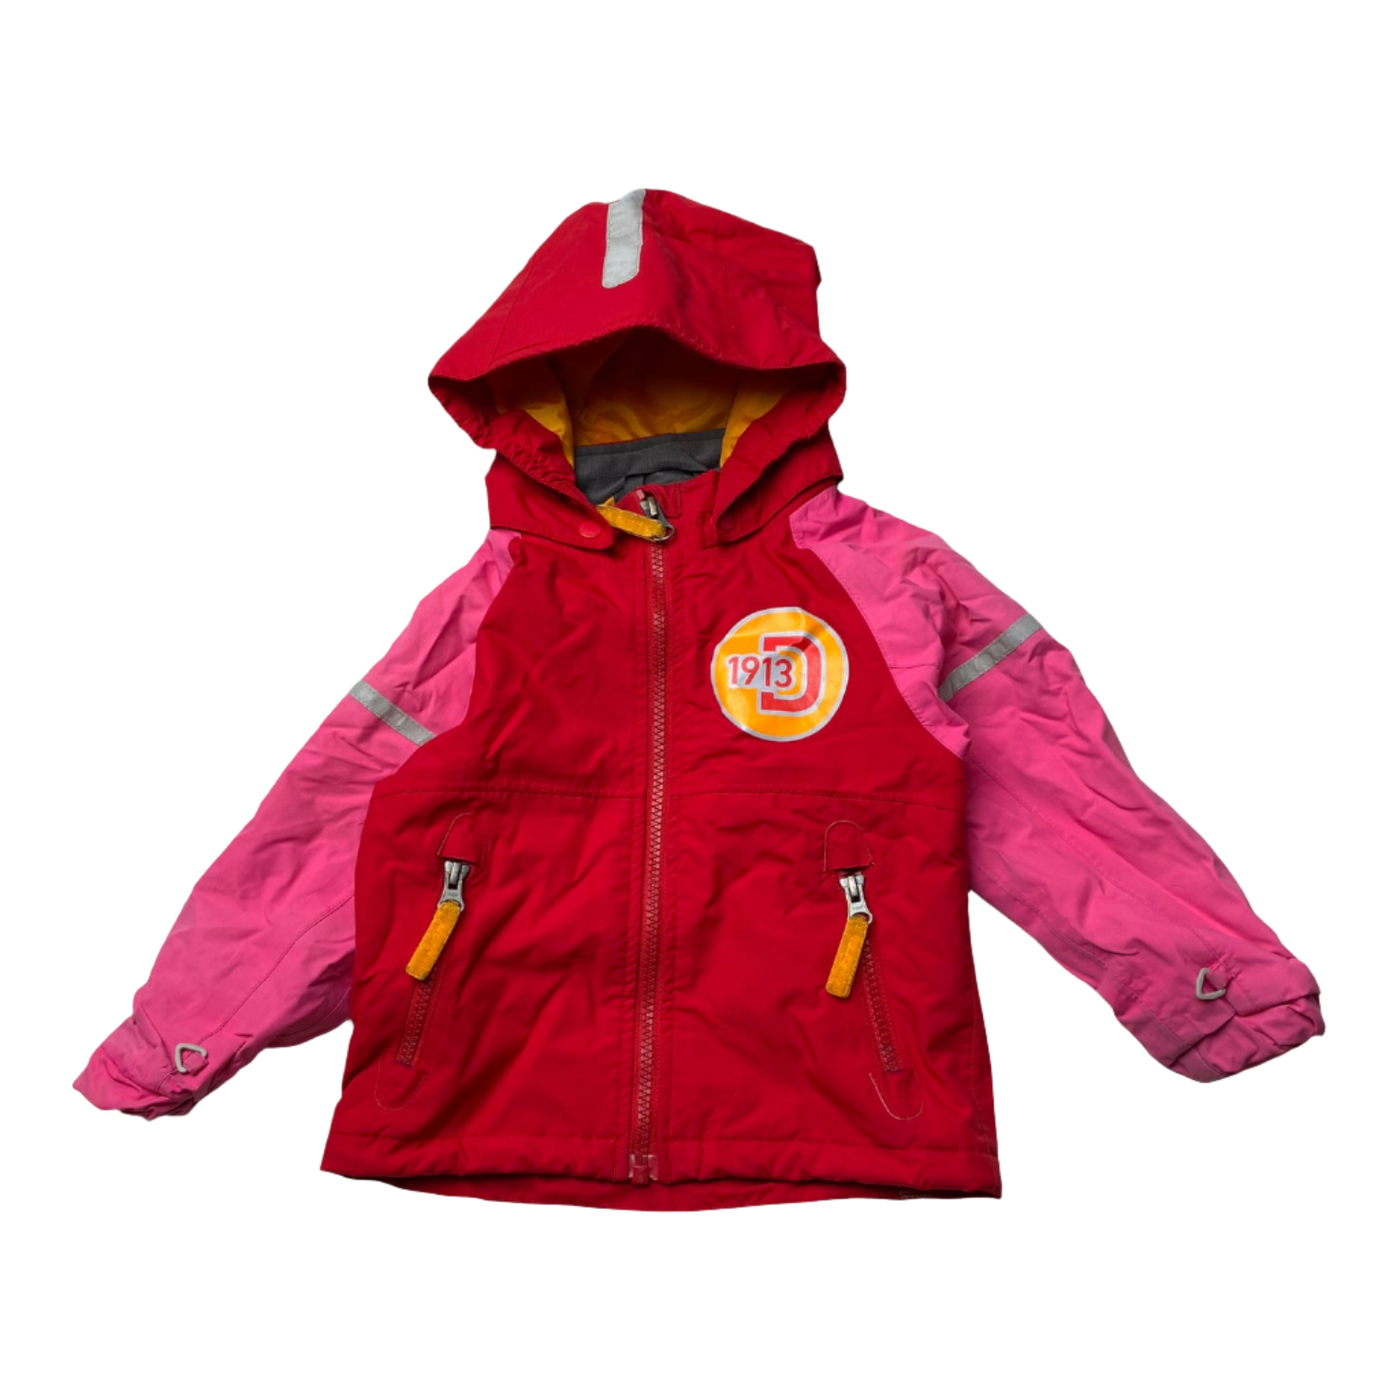 Didriksons wind jacket, hot pink/red | 80cm